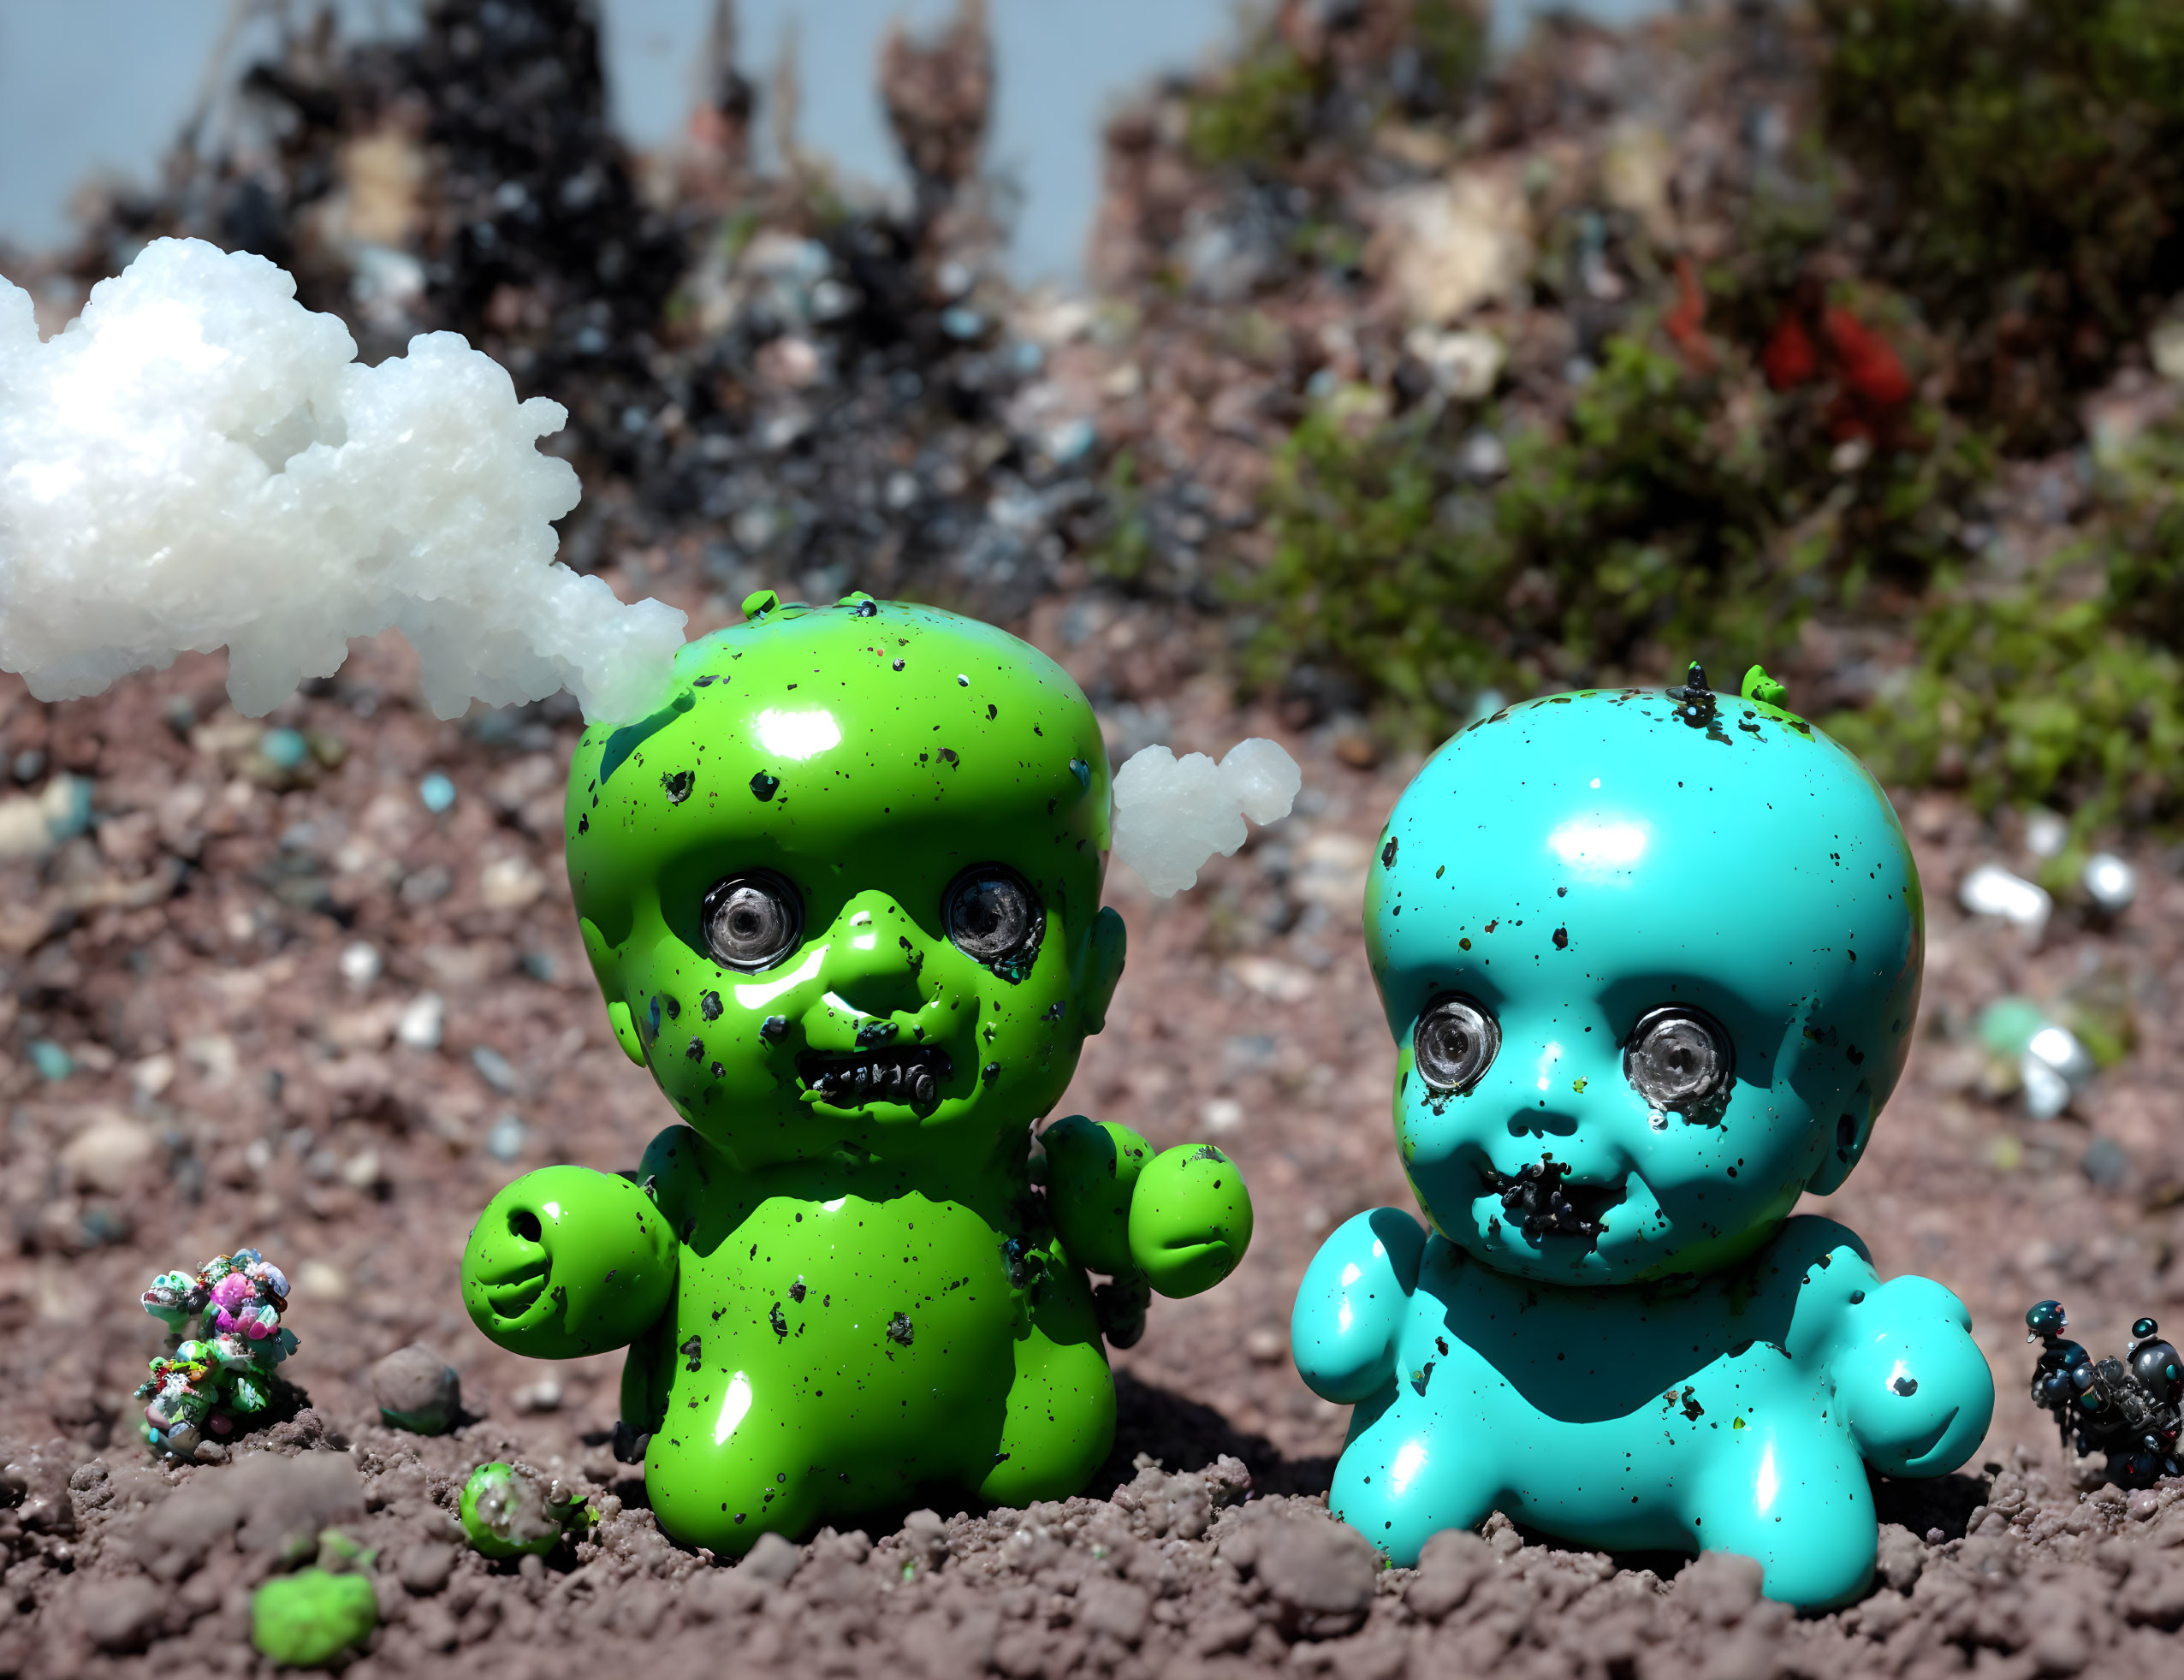 Two Textured Toy Monsters in Green and Blue on Rocky Terrain with Plants and White Puffs